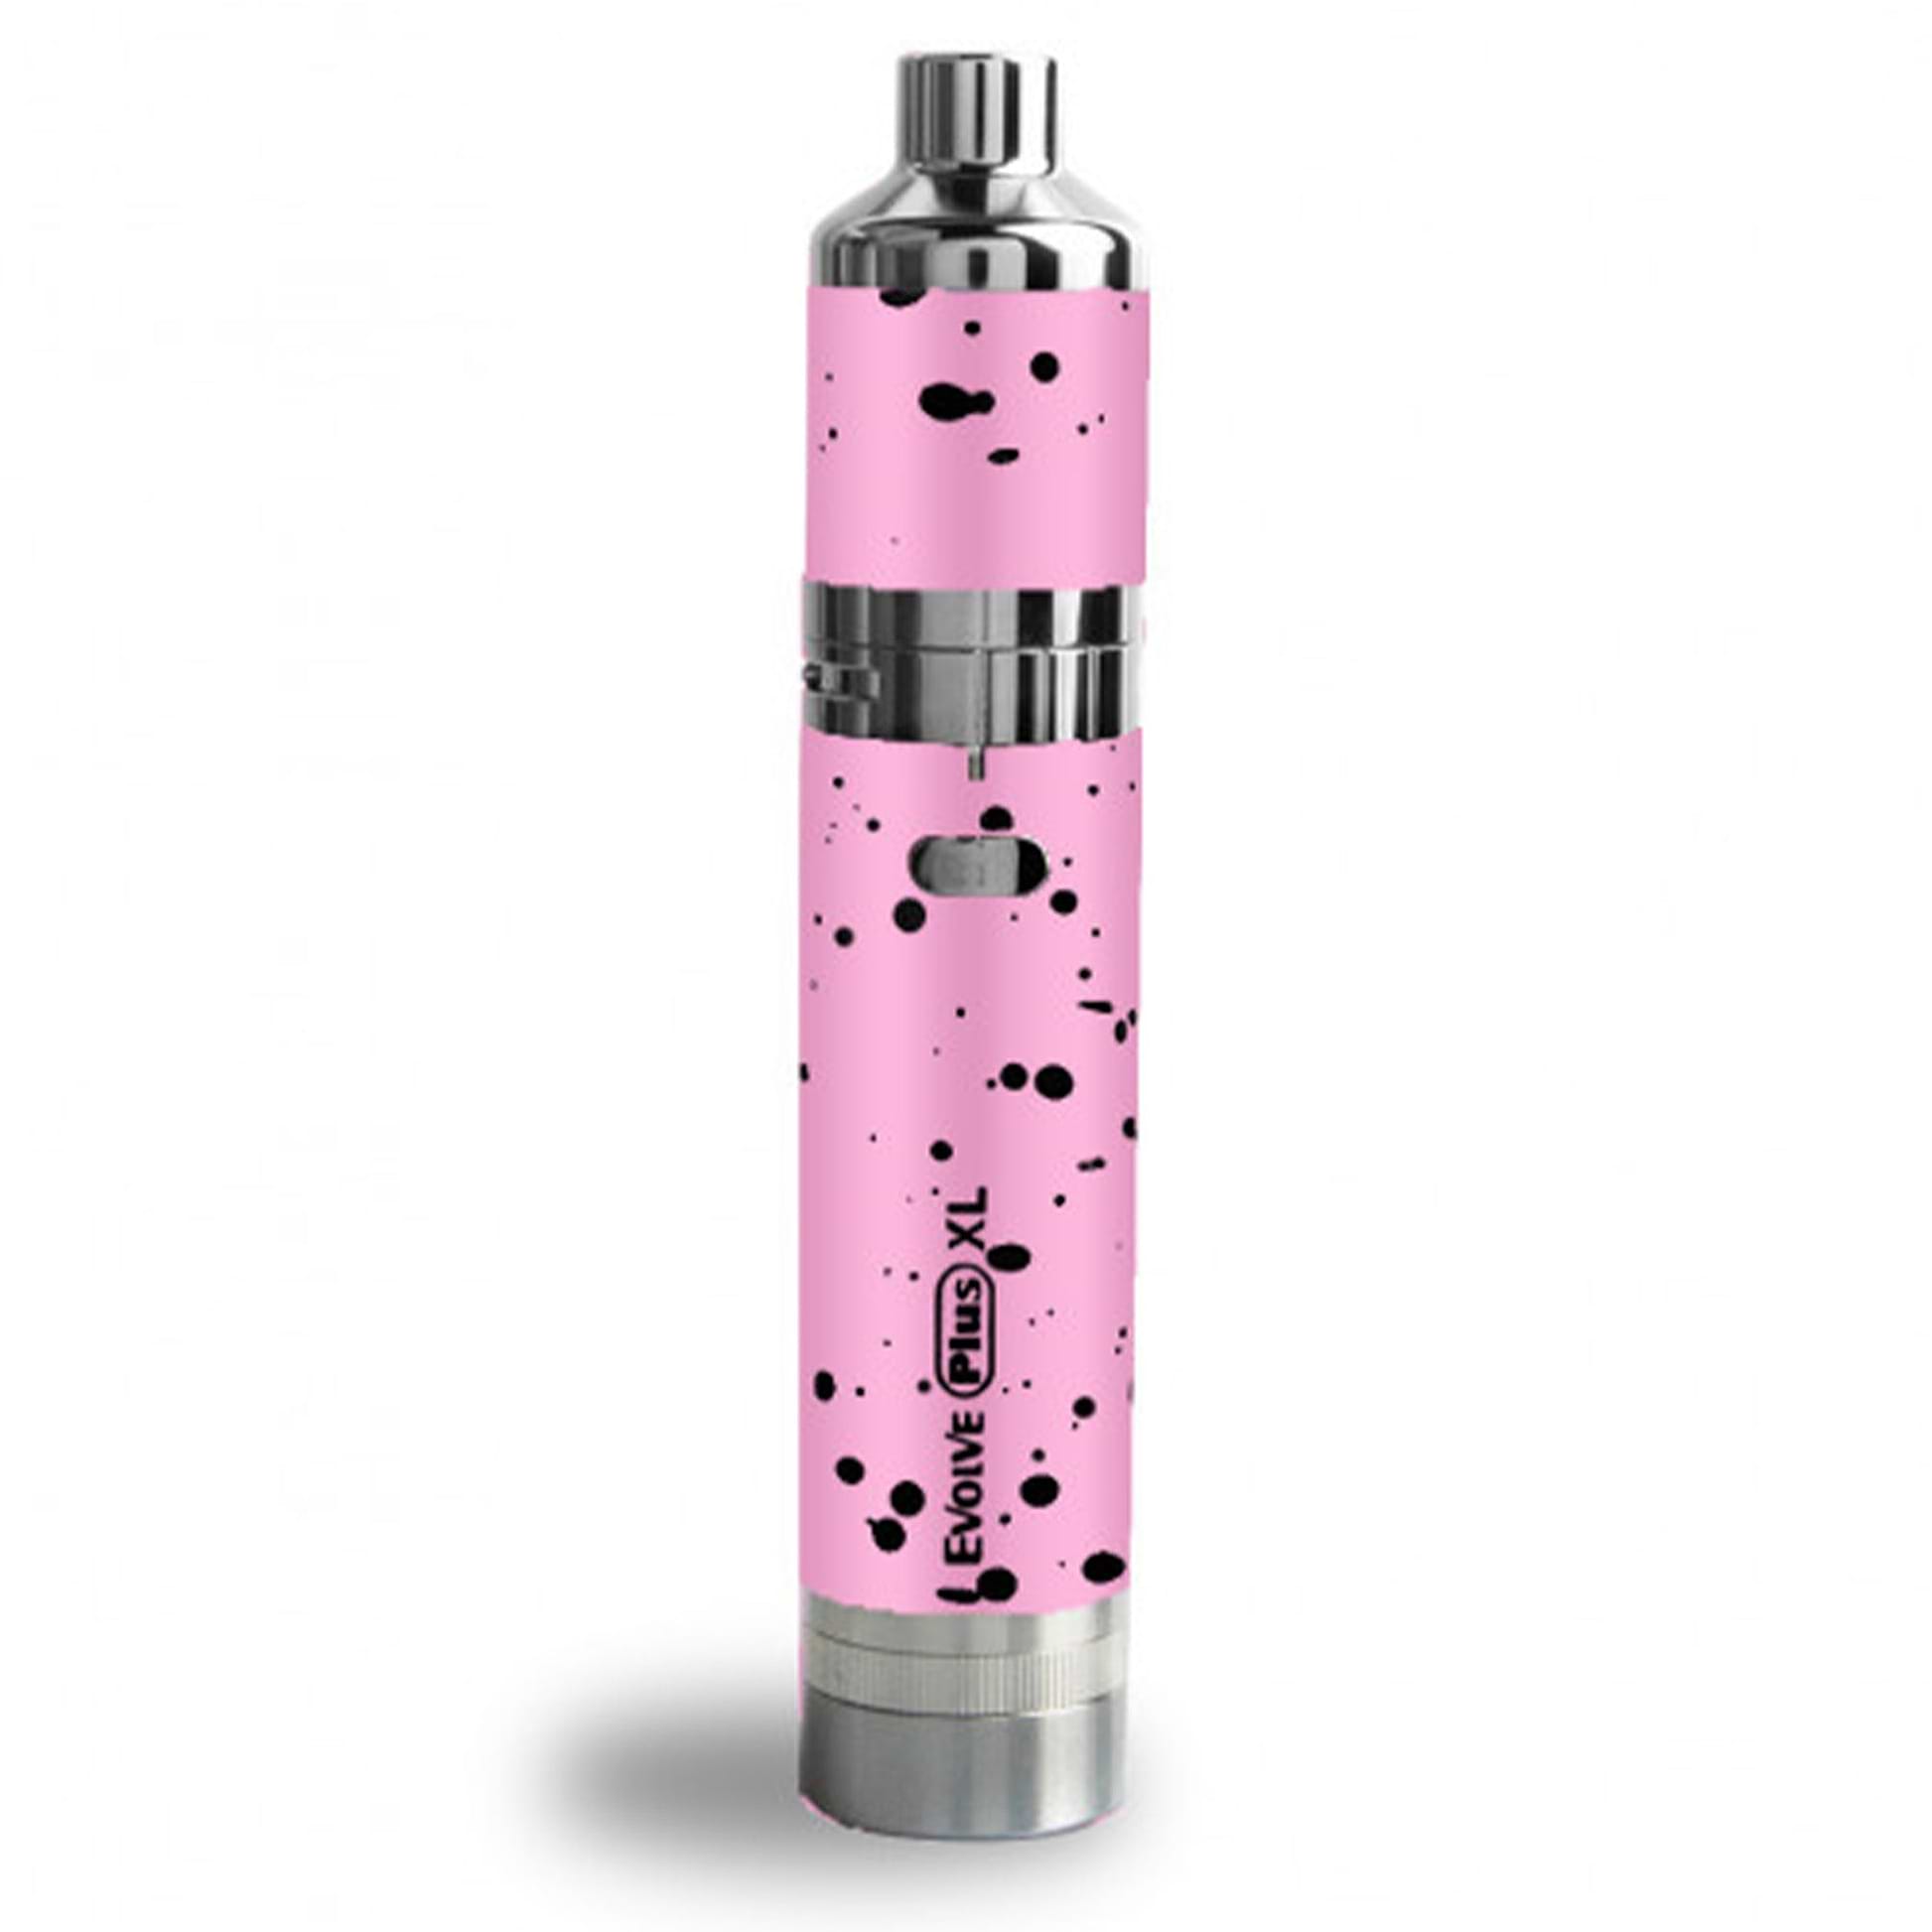 Wulf Evolve Plus Concentrate Vape XL / Pink/Black